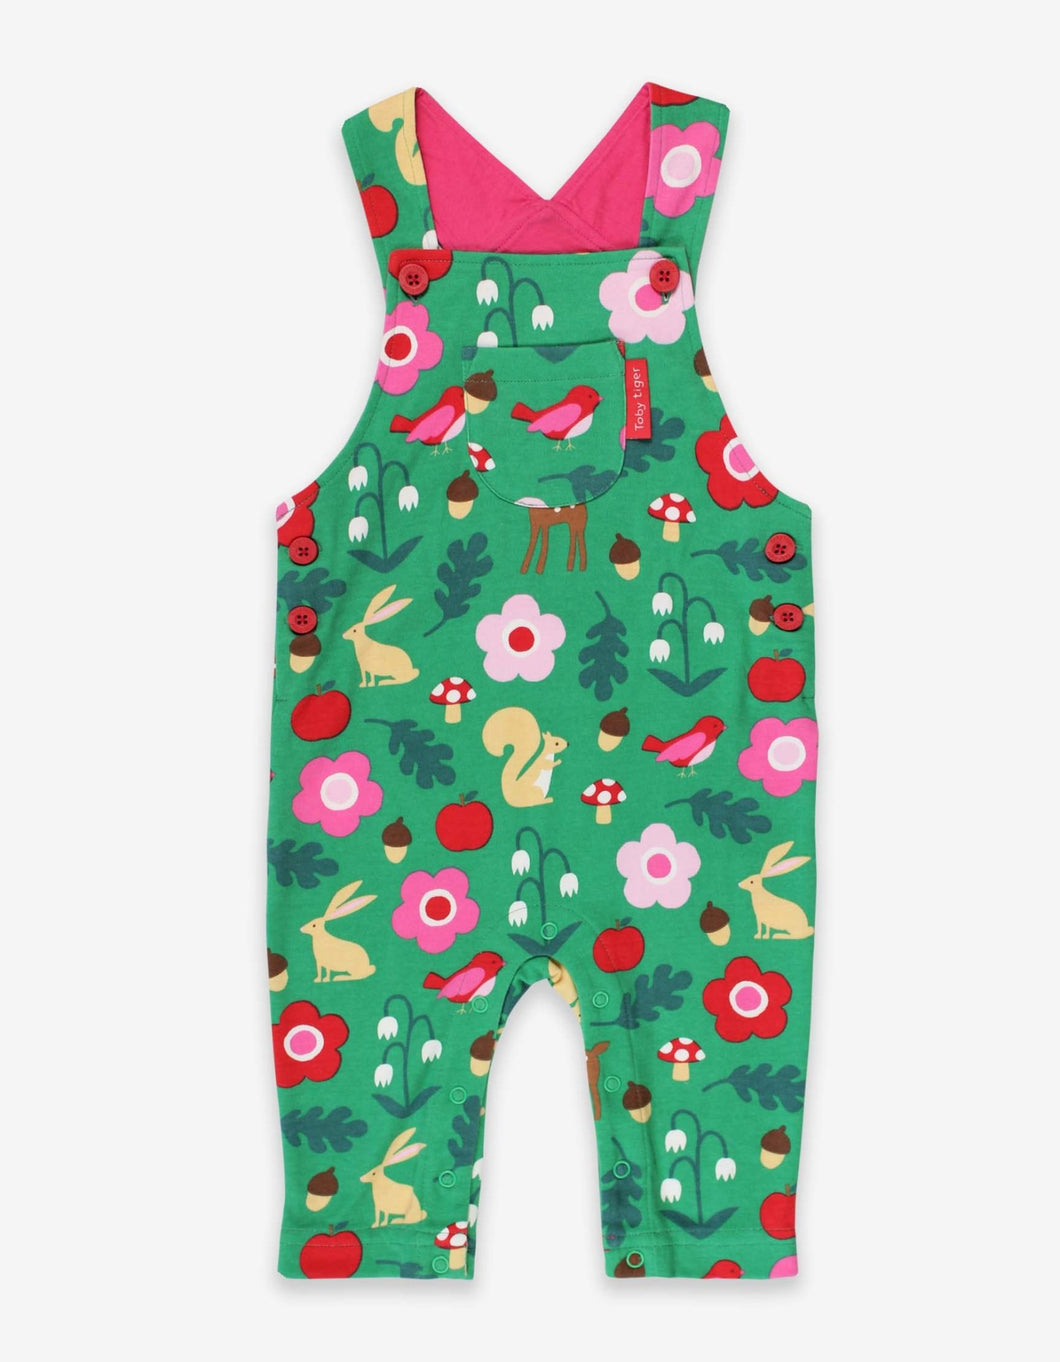 Organic Forest Adventure Print Dungarees - Toby Tiger